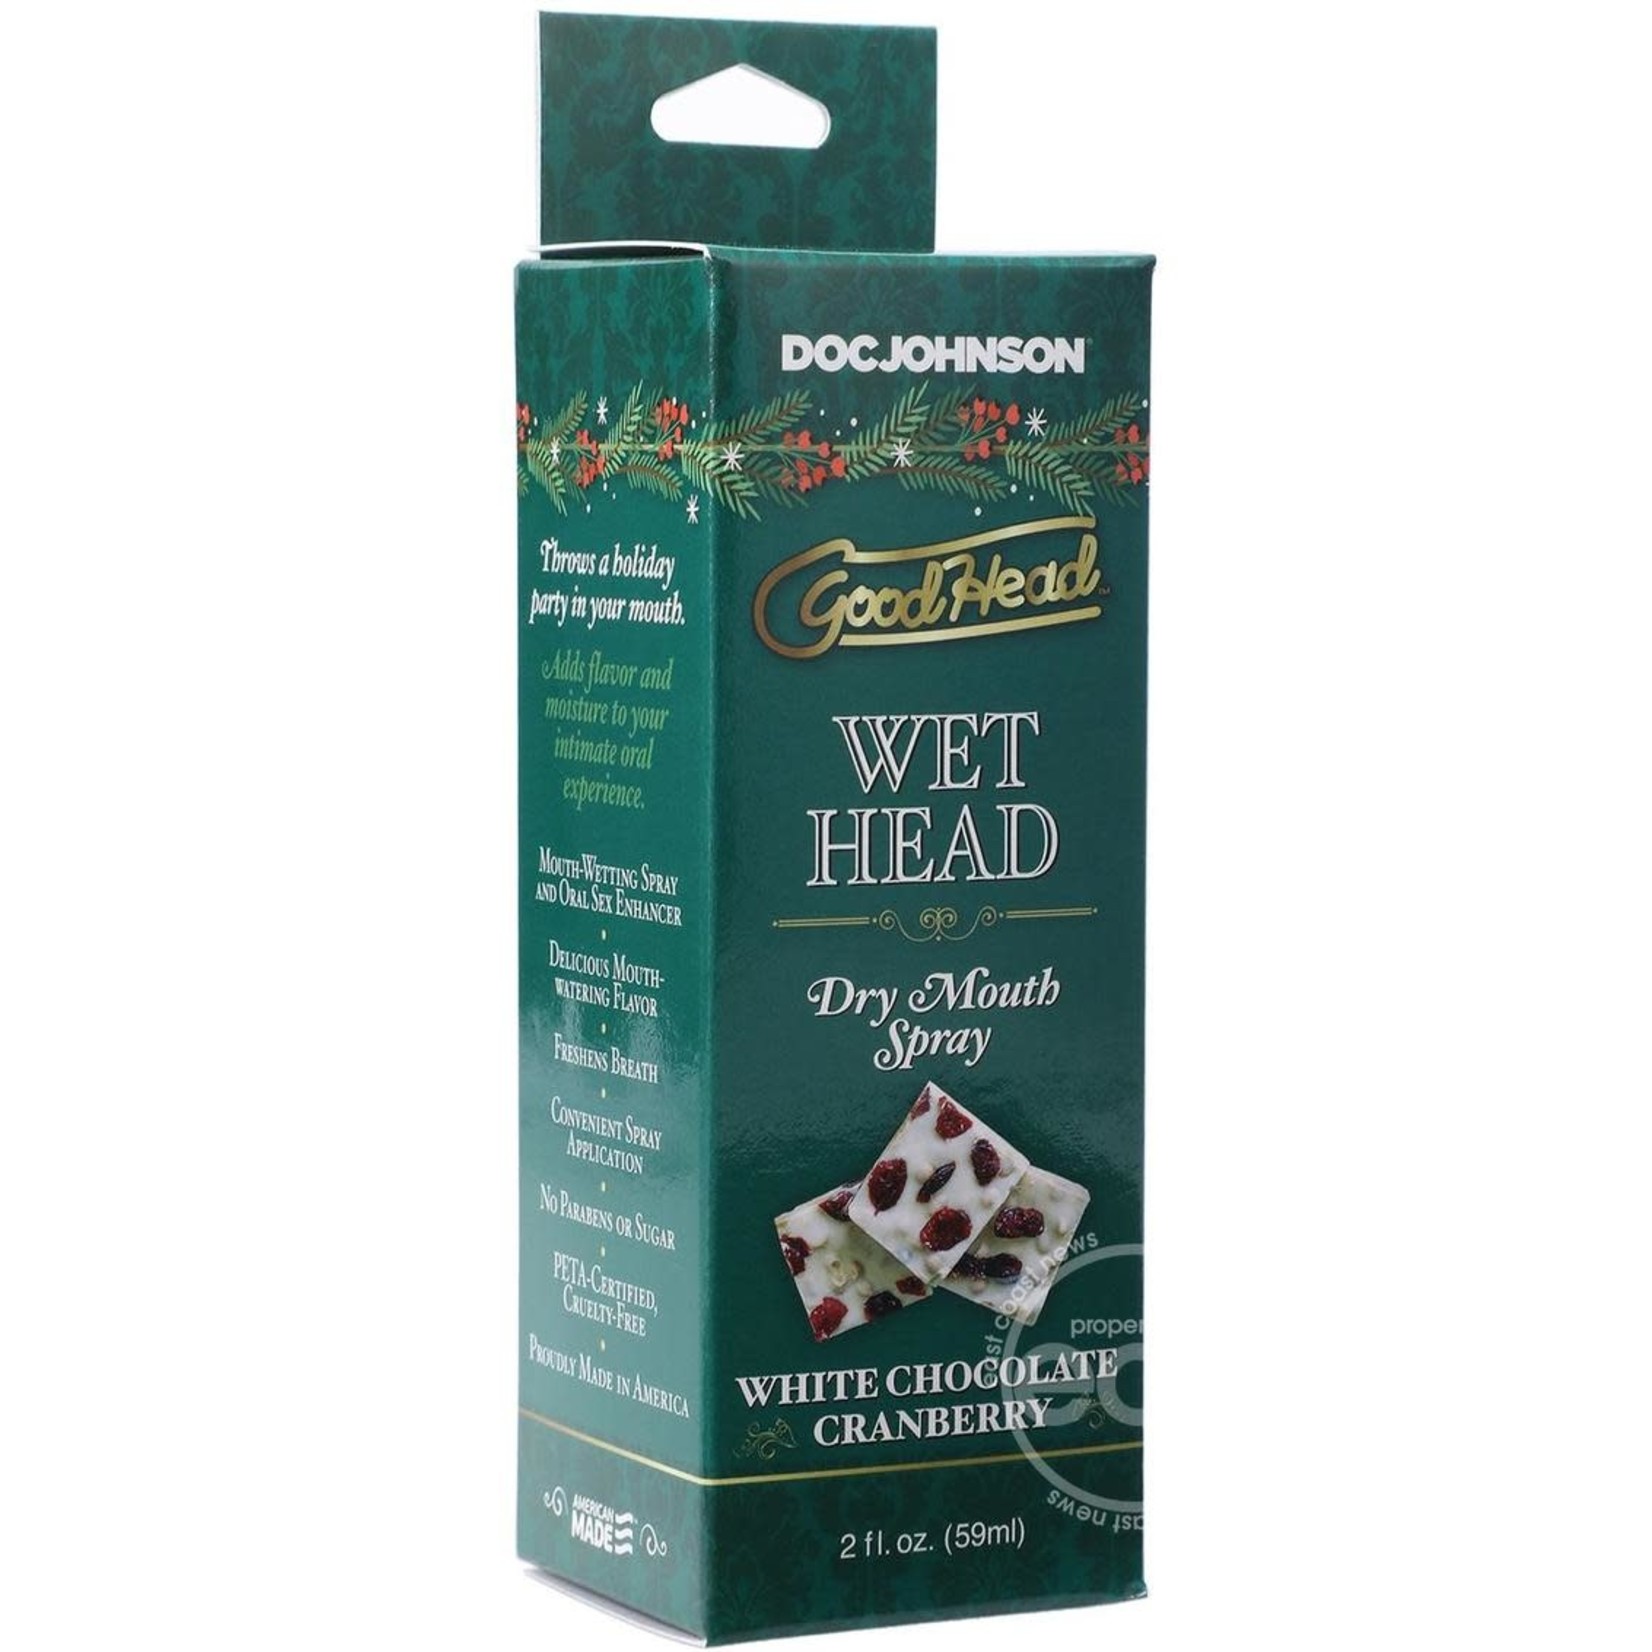 GoodHead Holiday Wet Head Dry Mouth Spray 2oz - White Chocolate Cranberry